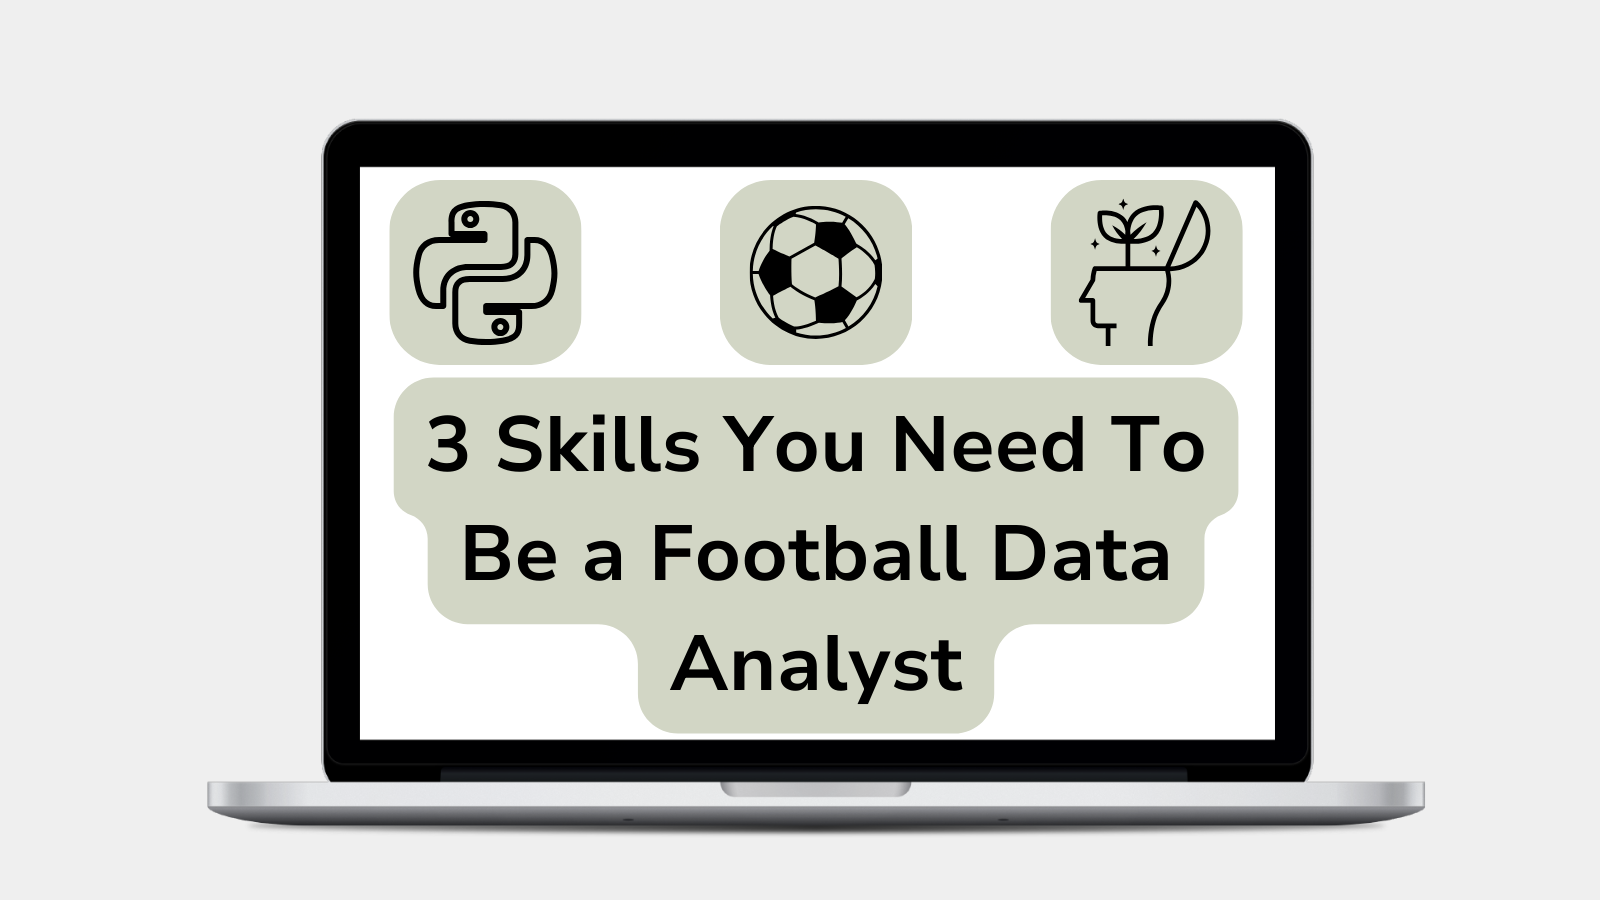 3 Skills You Need To Be a Football Data Analyst